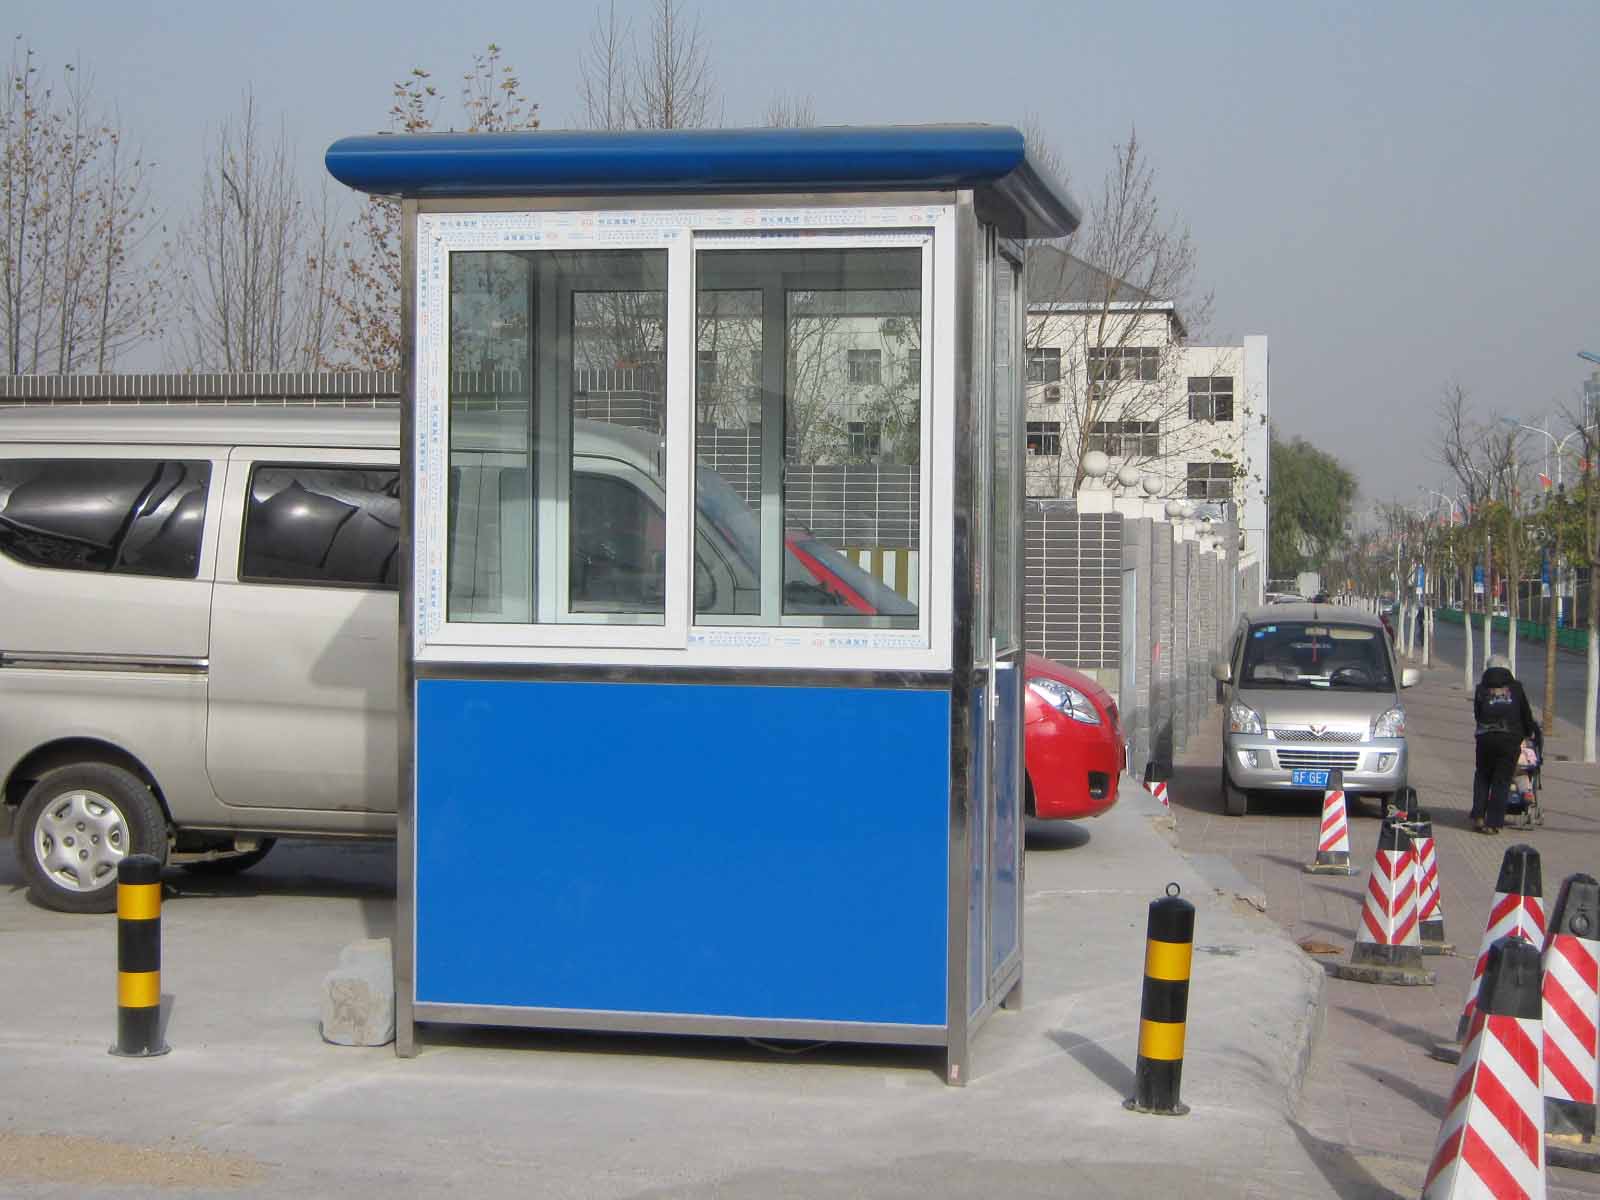 Prefabricated Steel Structure Sentry Box With Good Price and Good Quality